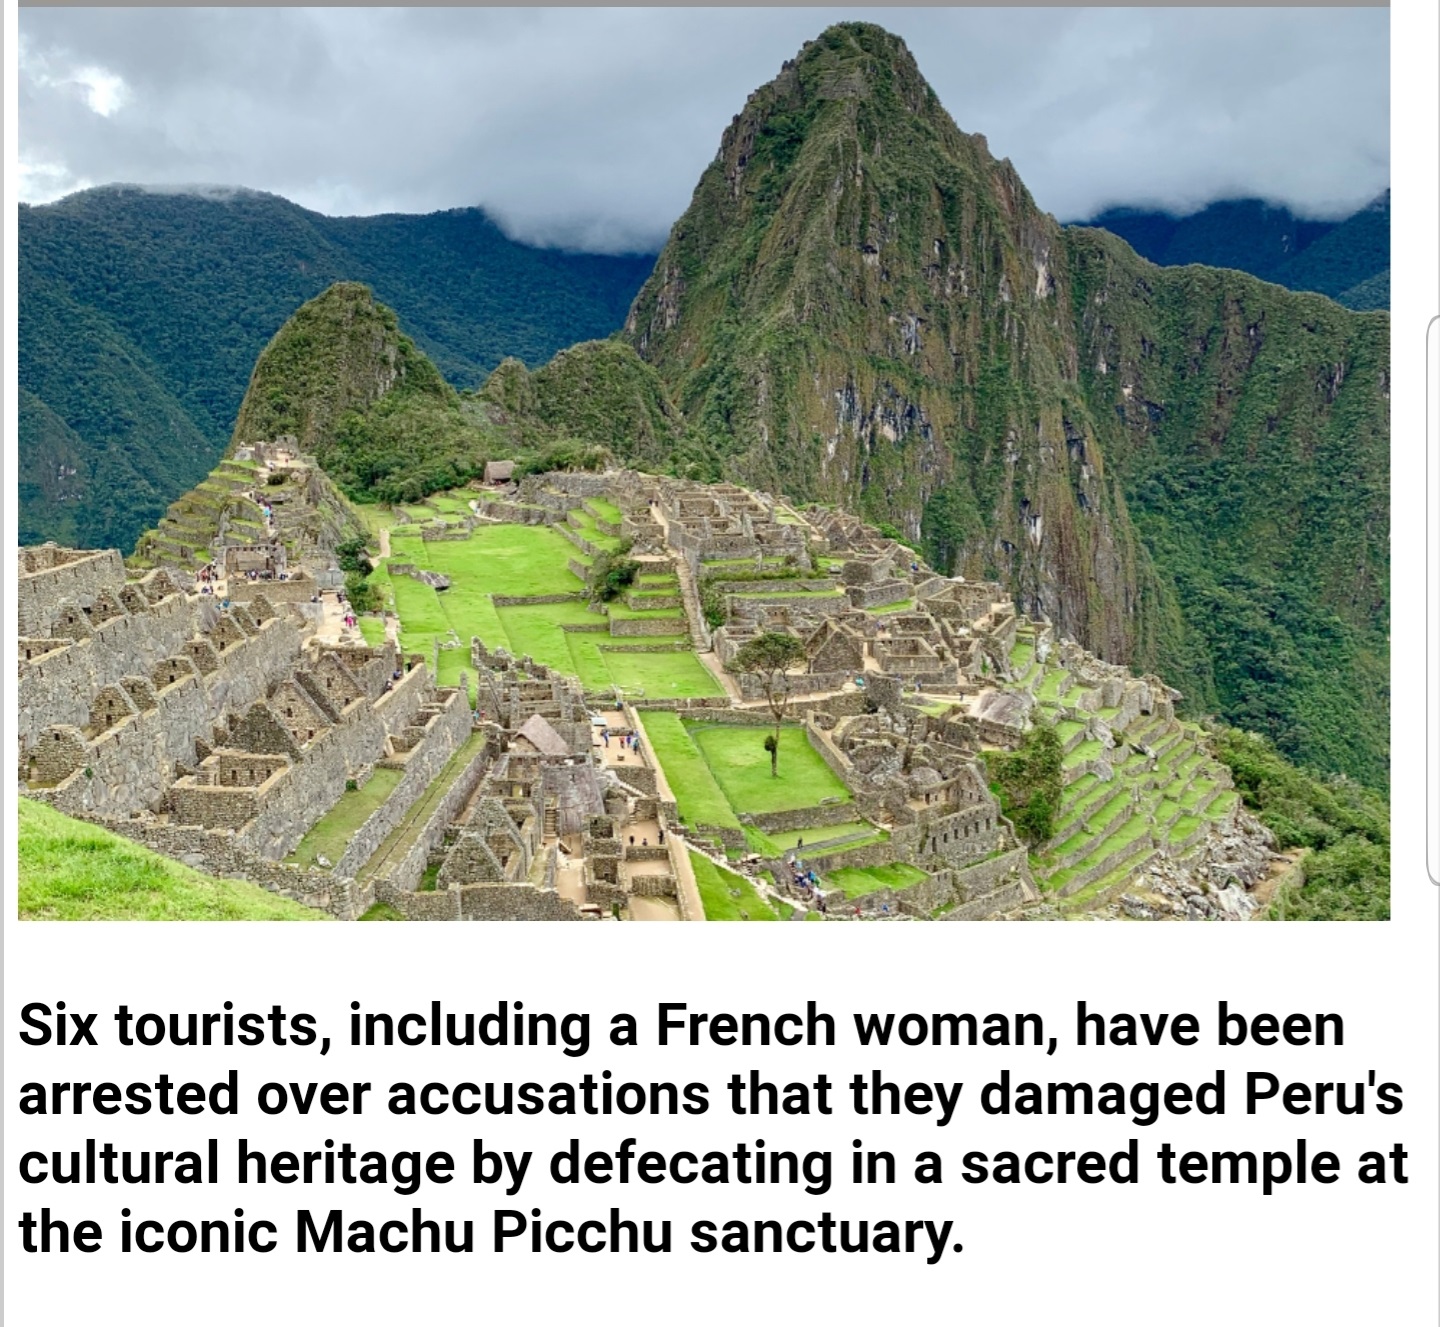 machu picchu - Six tourists, including a French woman, have been arrested over accusations that they damaged Peru's cultural heritage by defecating in a sacred temple at the iconic Machu Picchu sanctuary.